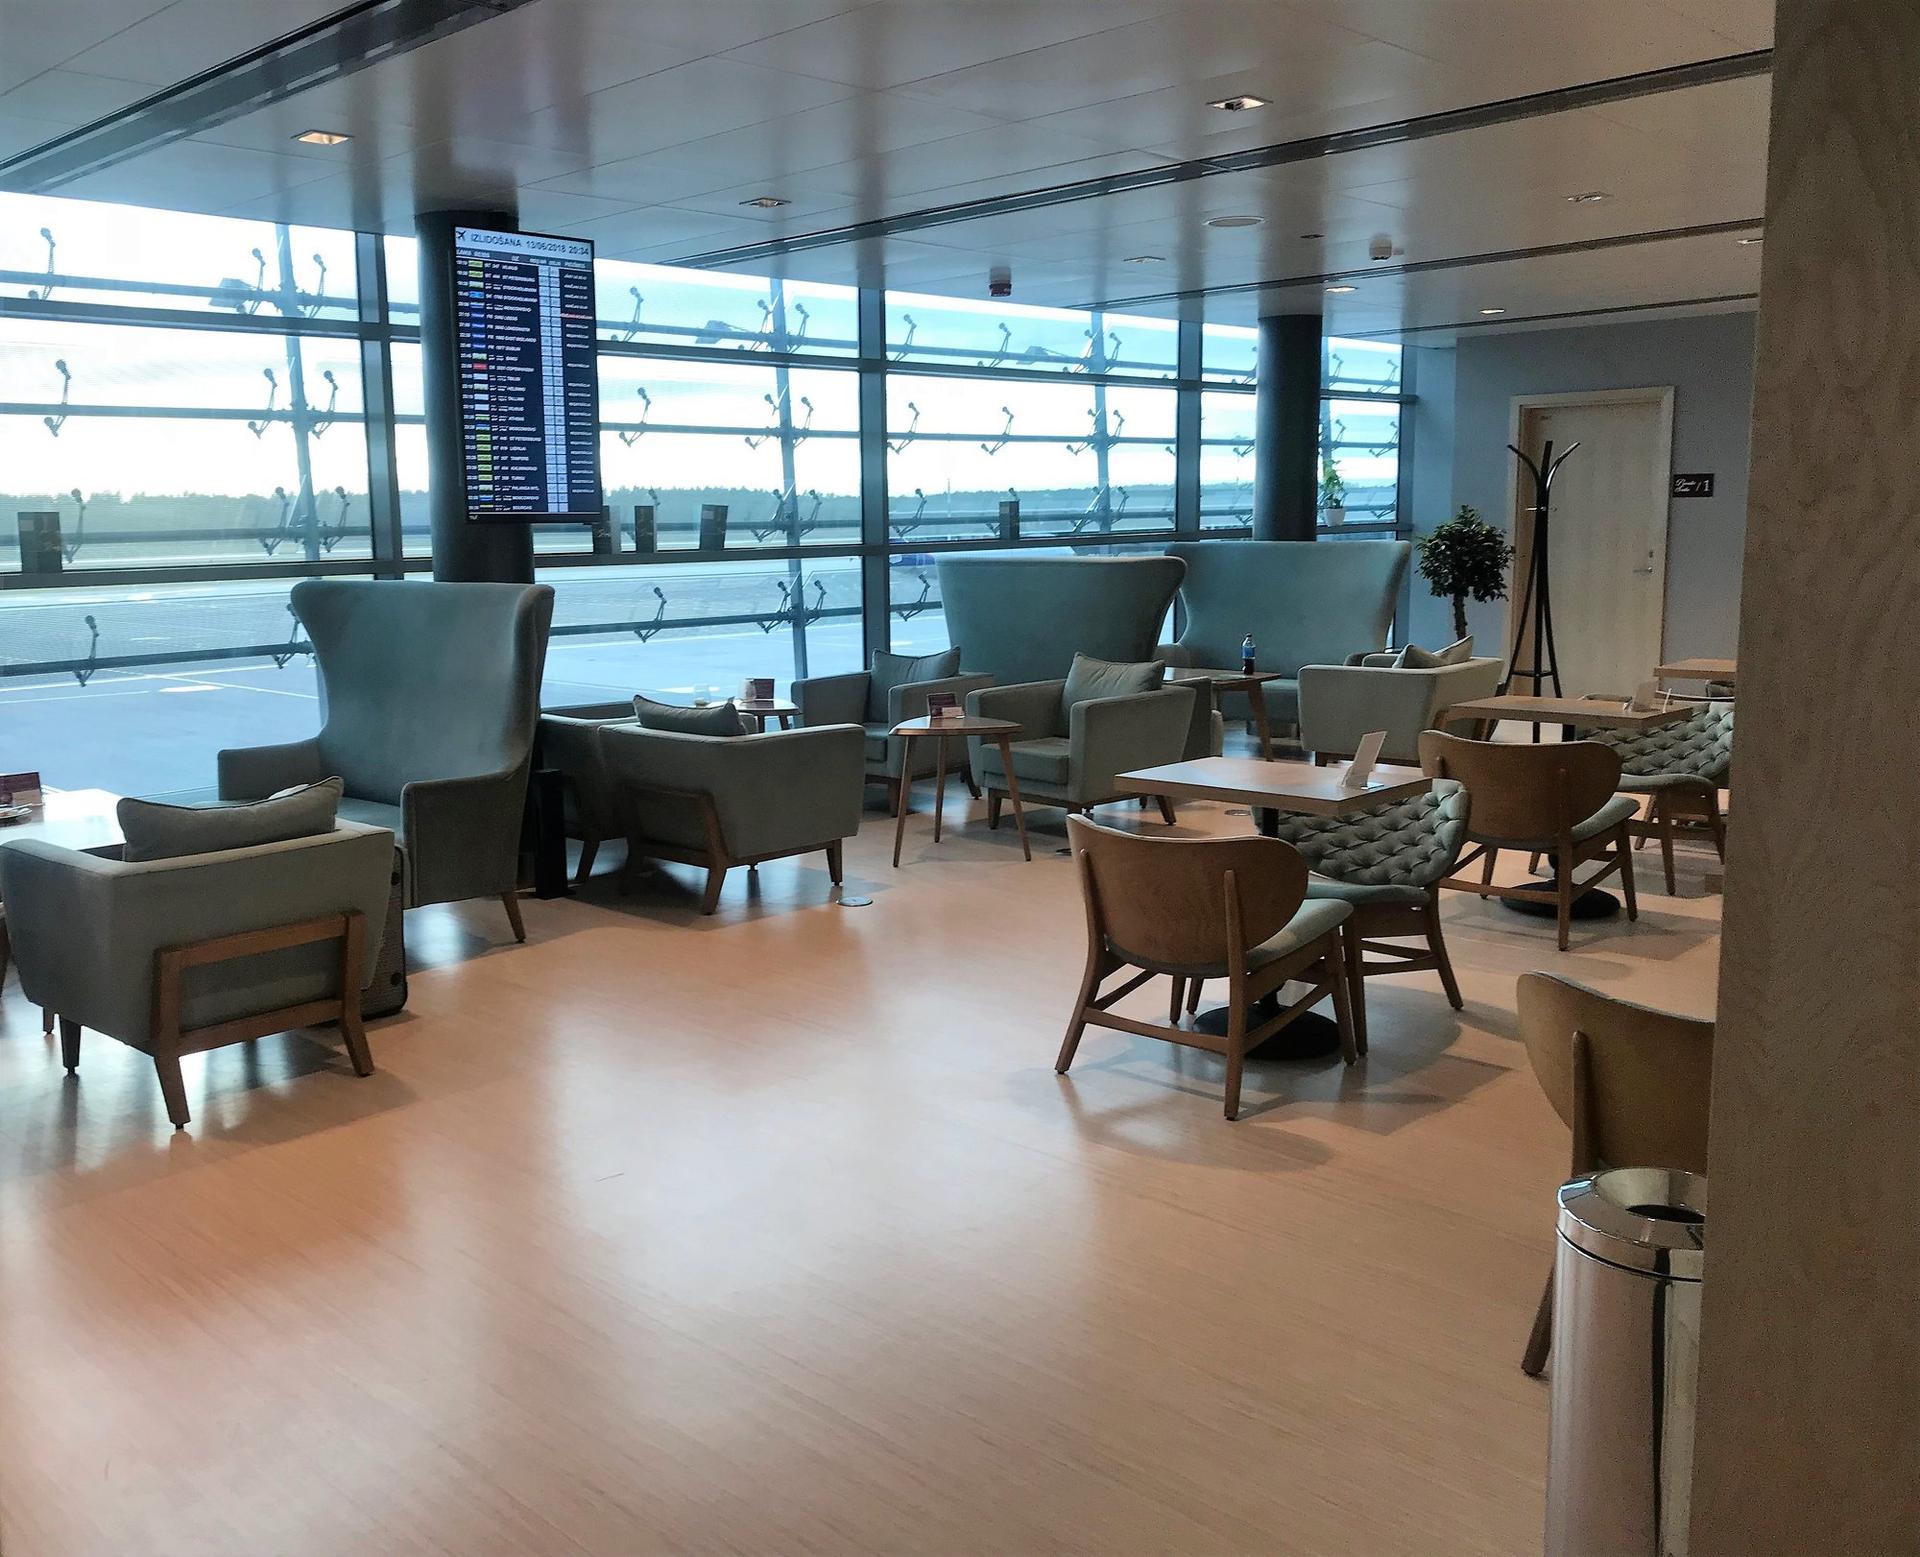 Primeclass Business Lounge image 18 of 48